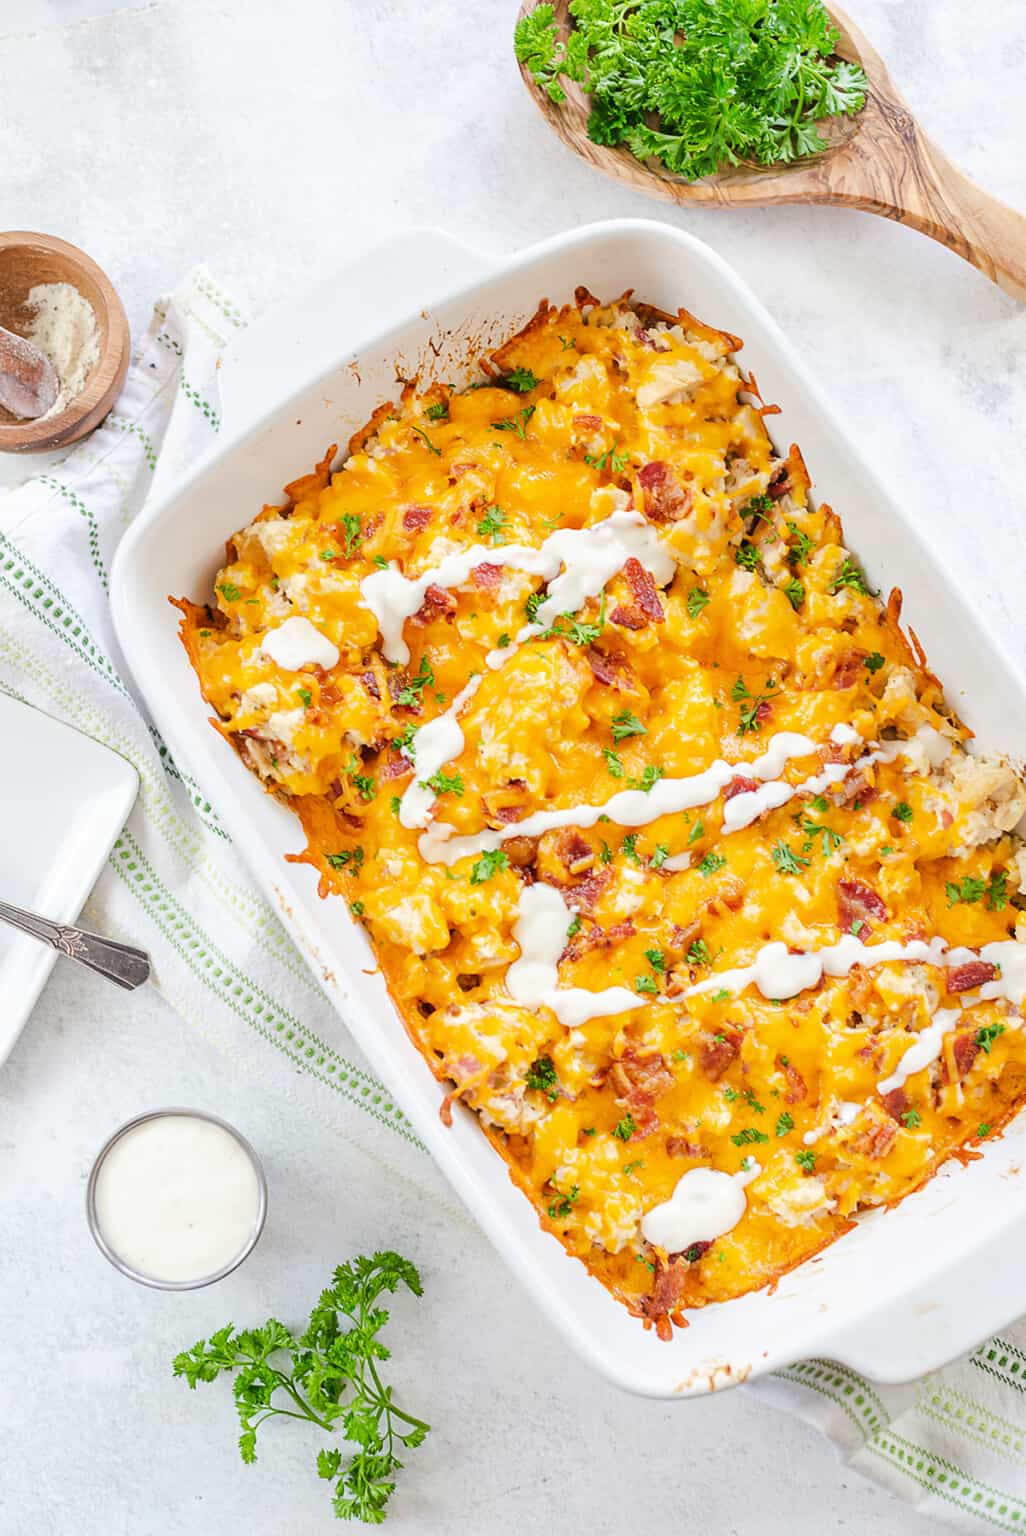 Keto Chicken Bacon Ranch Casserole | That Low Carb Life